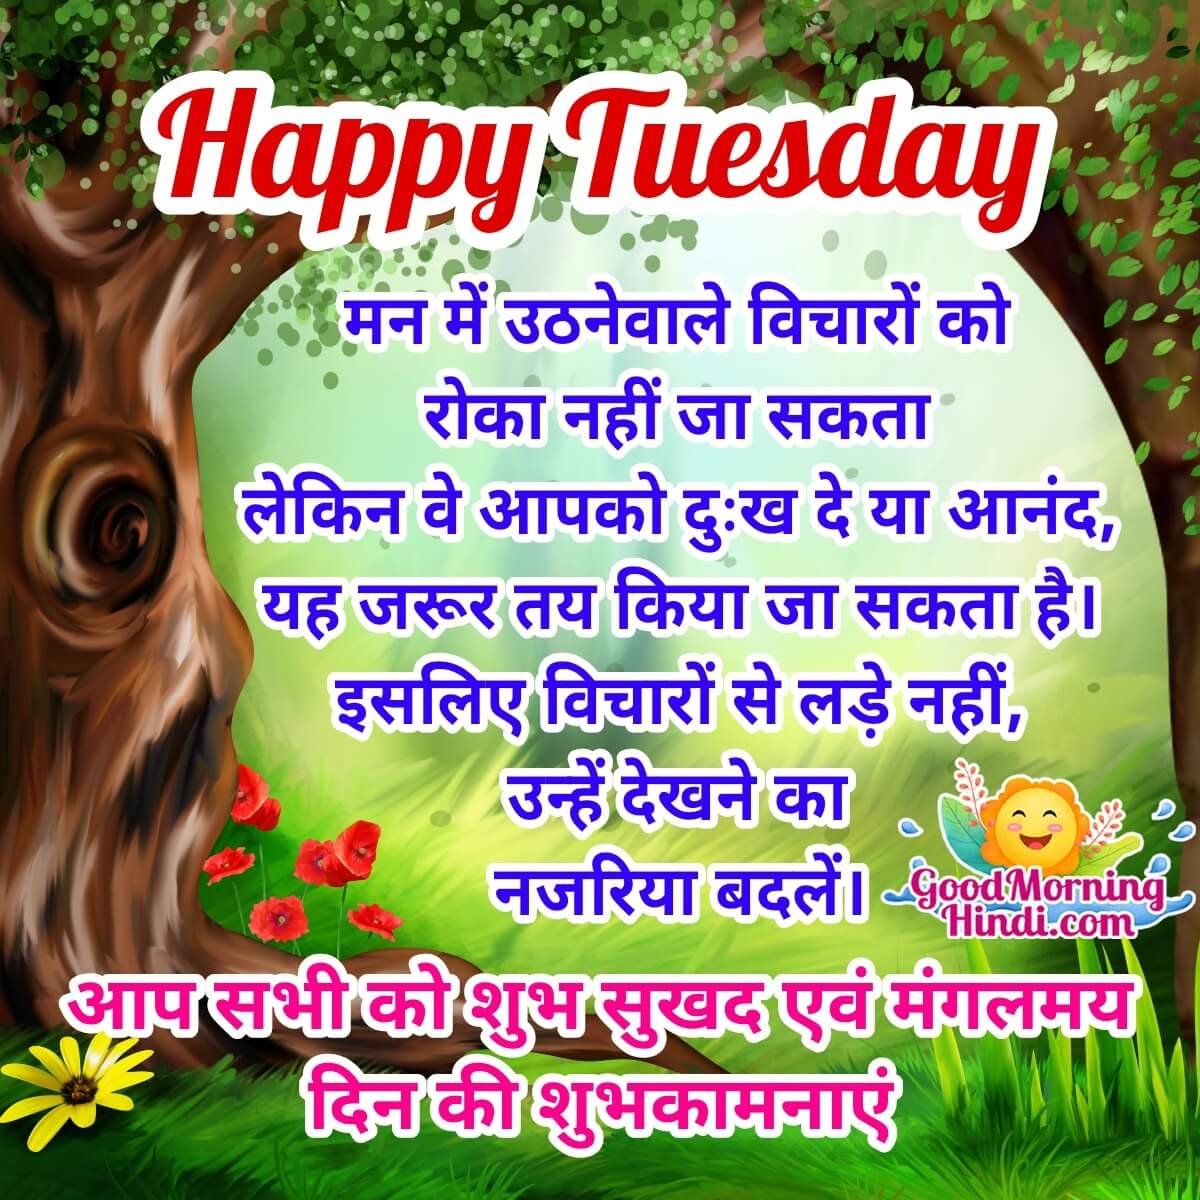 Extensive Compilation of Over 999 Good Morning Tuesday Images in Hindi – Incredible Collection in Full 4K Resolution